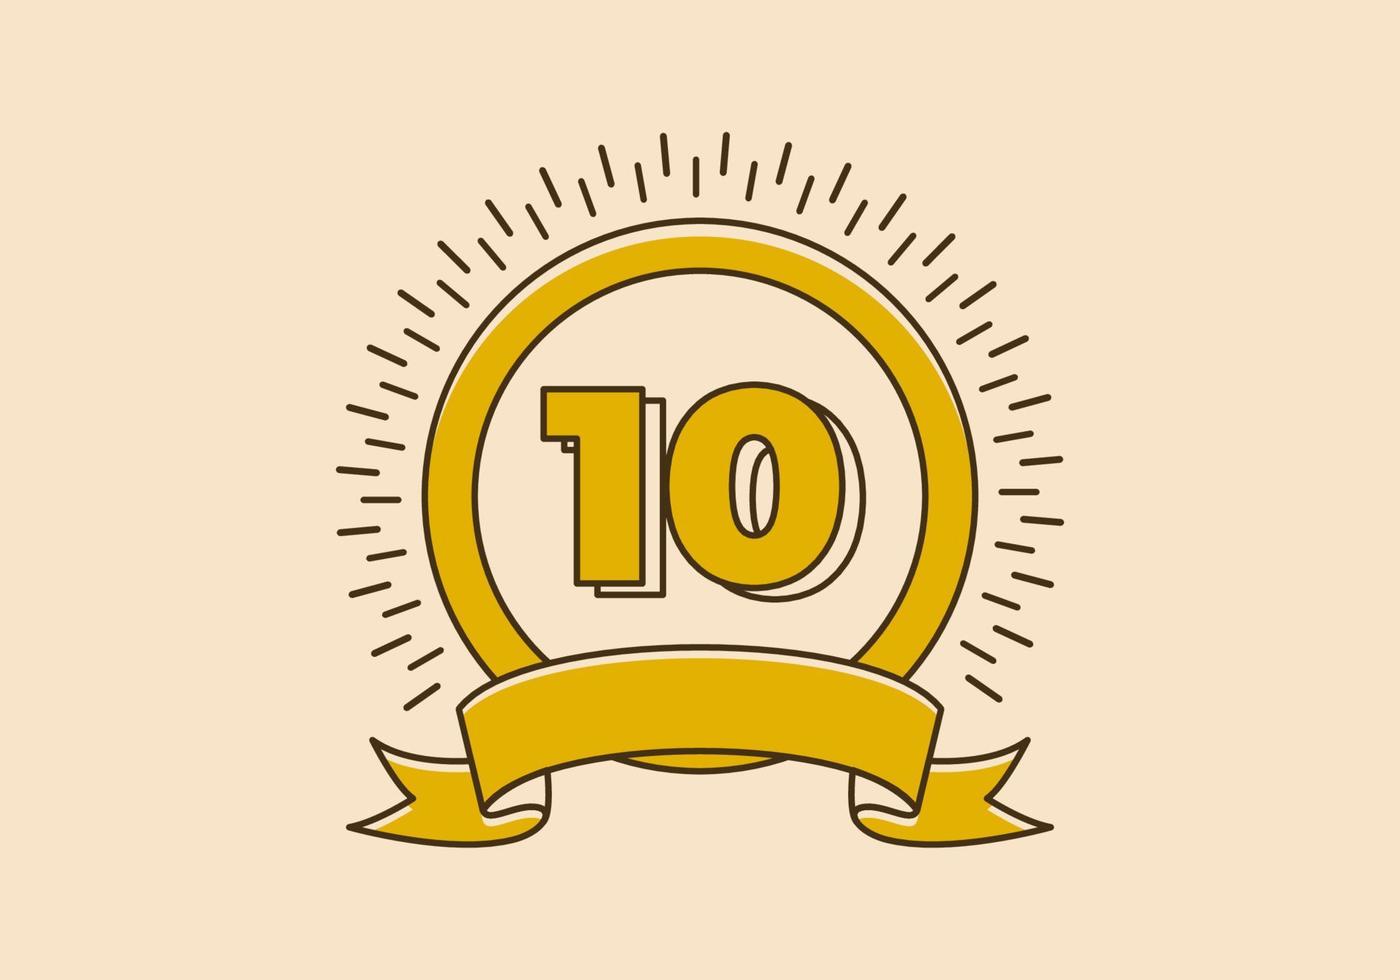 Vintage yellow circle badge with number 10 on it vector